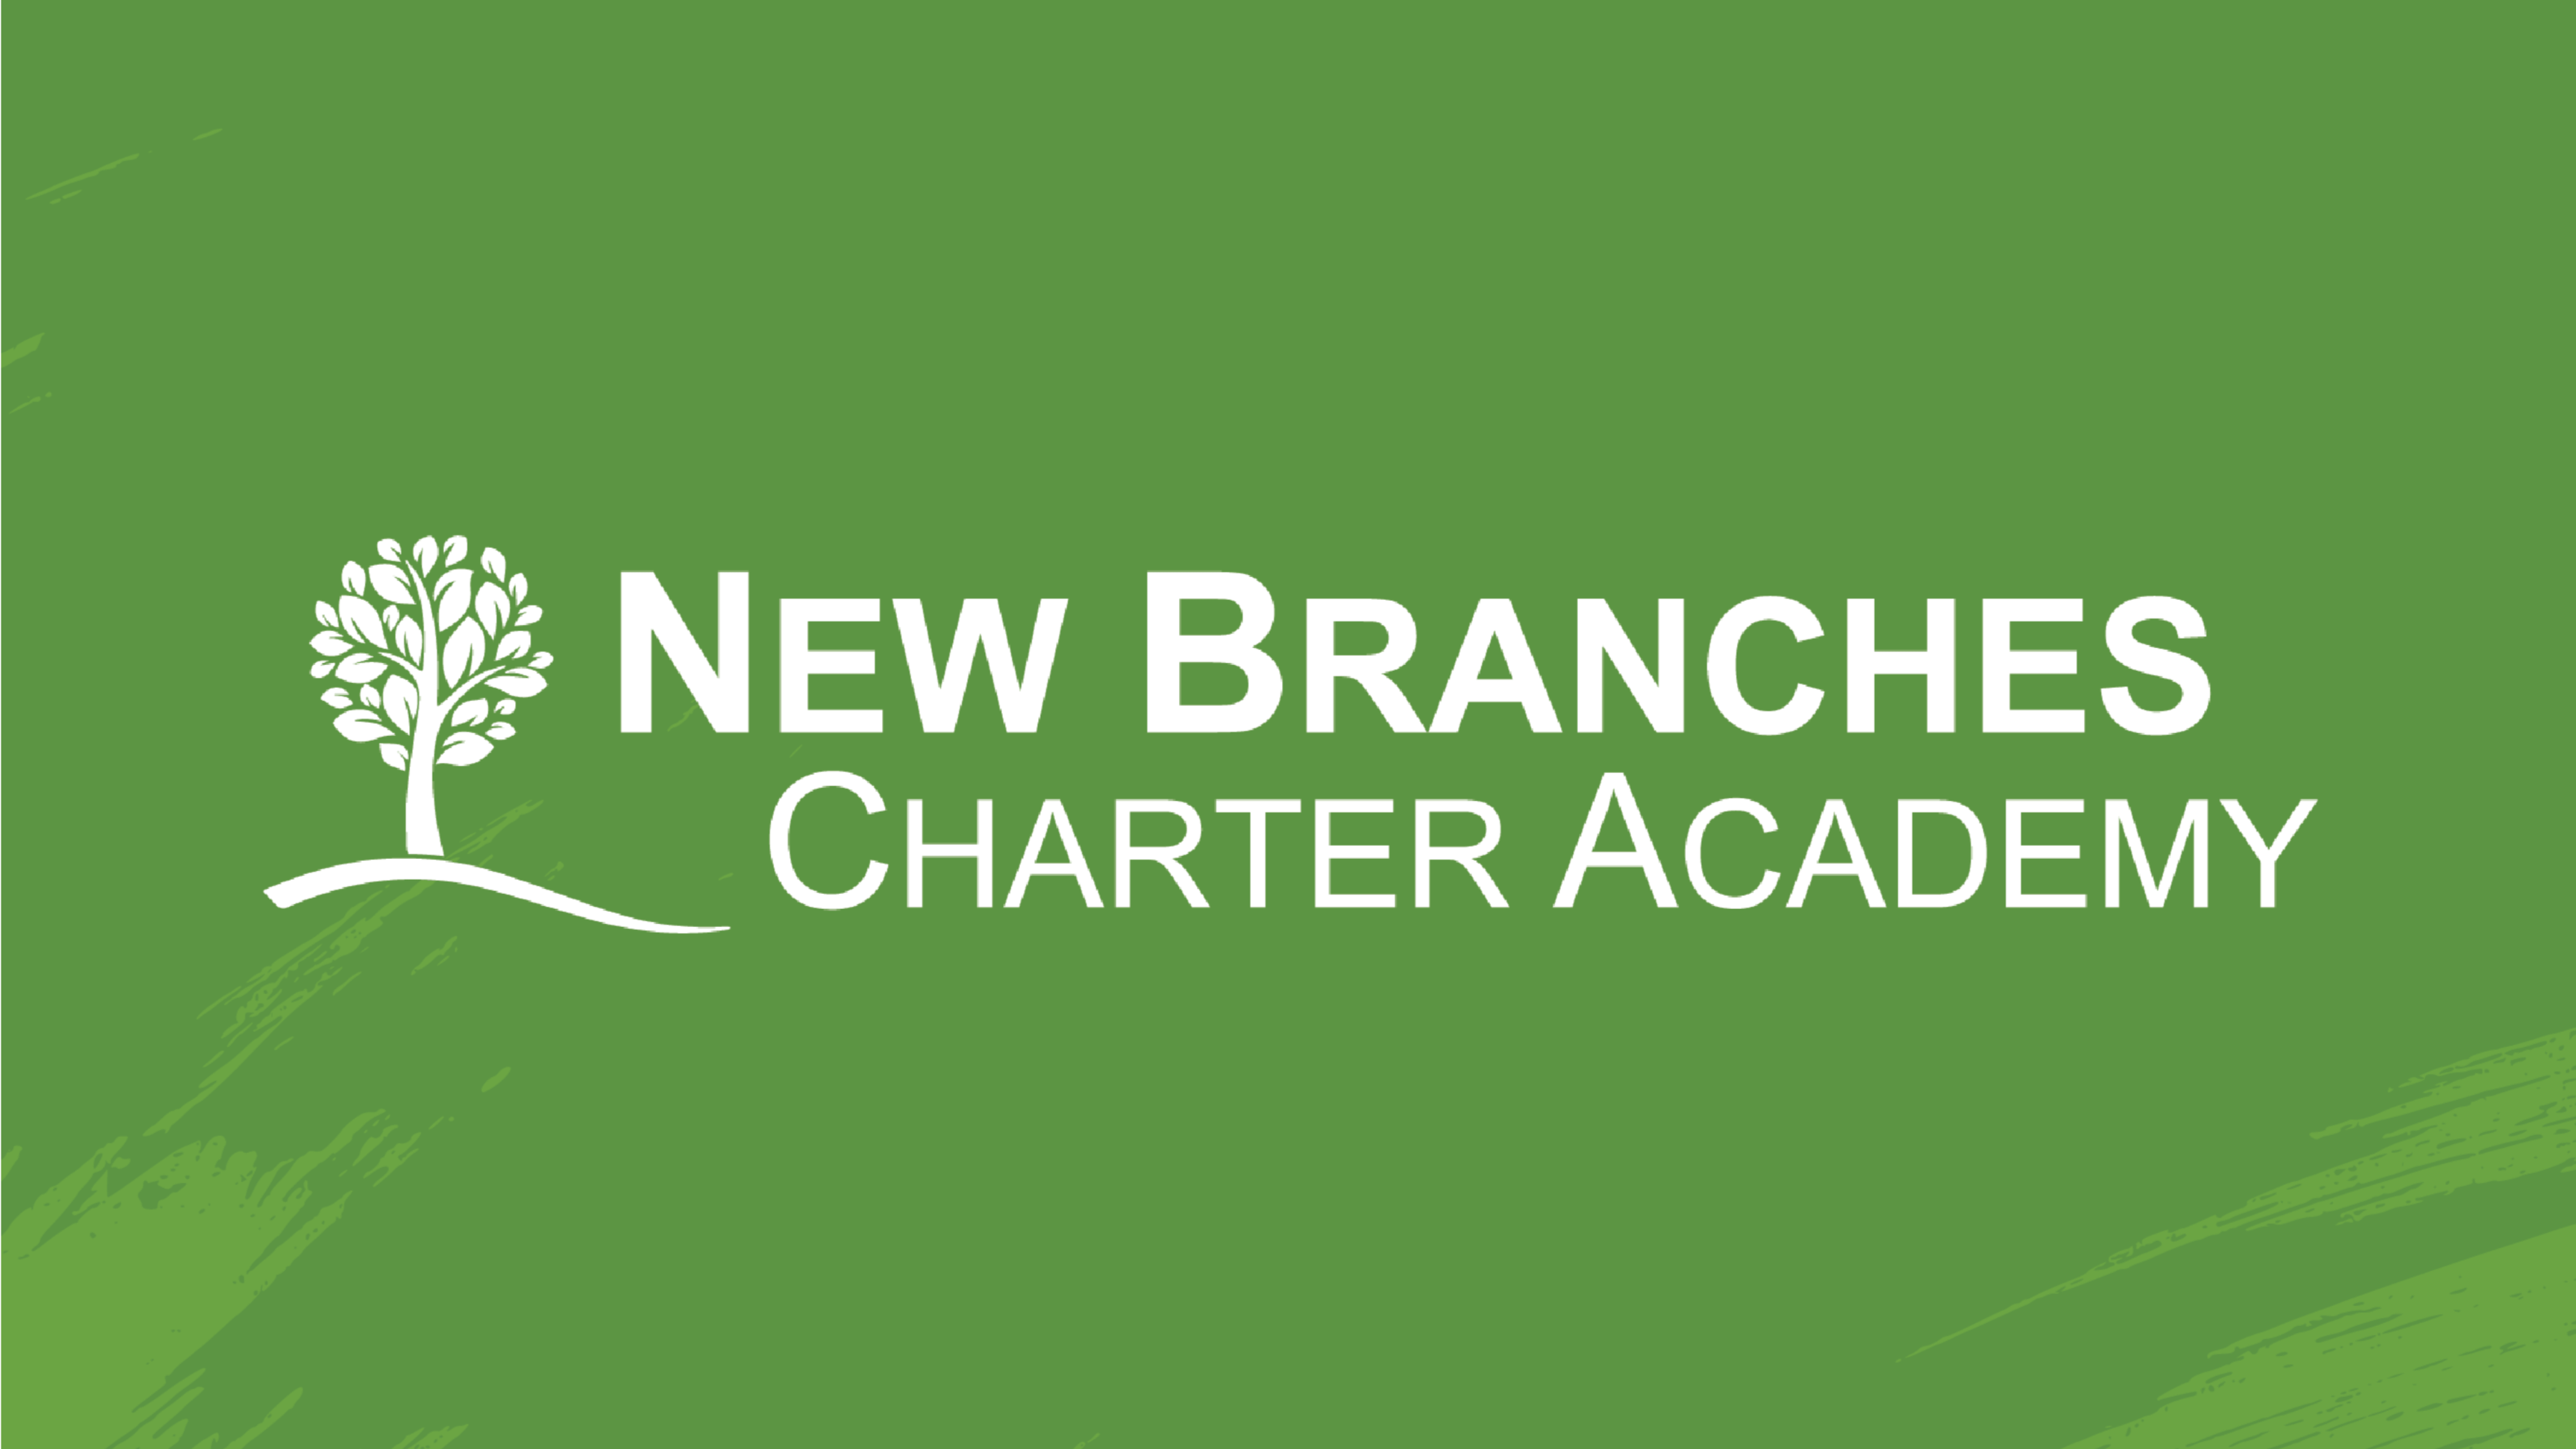 New Branches Charter Academy logo